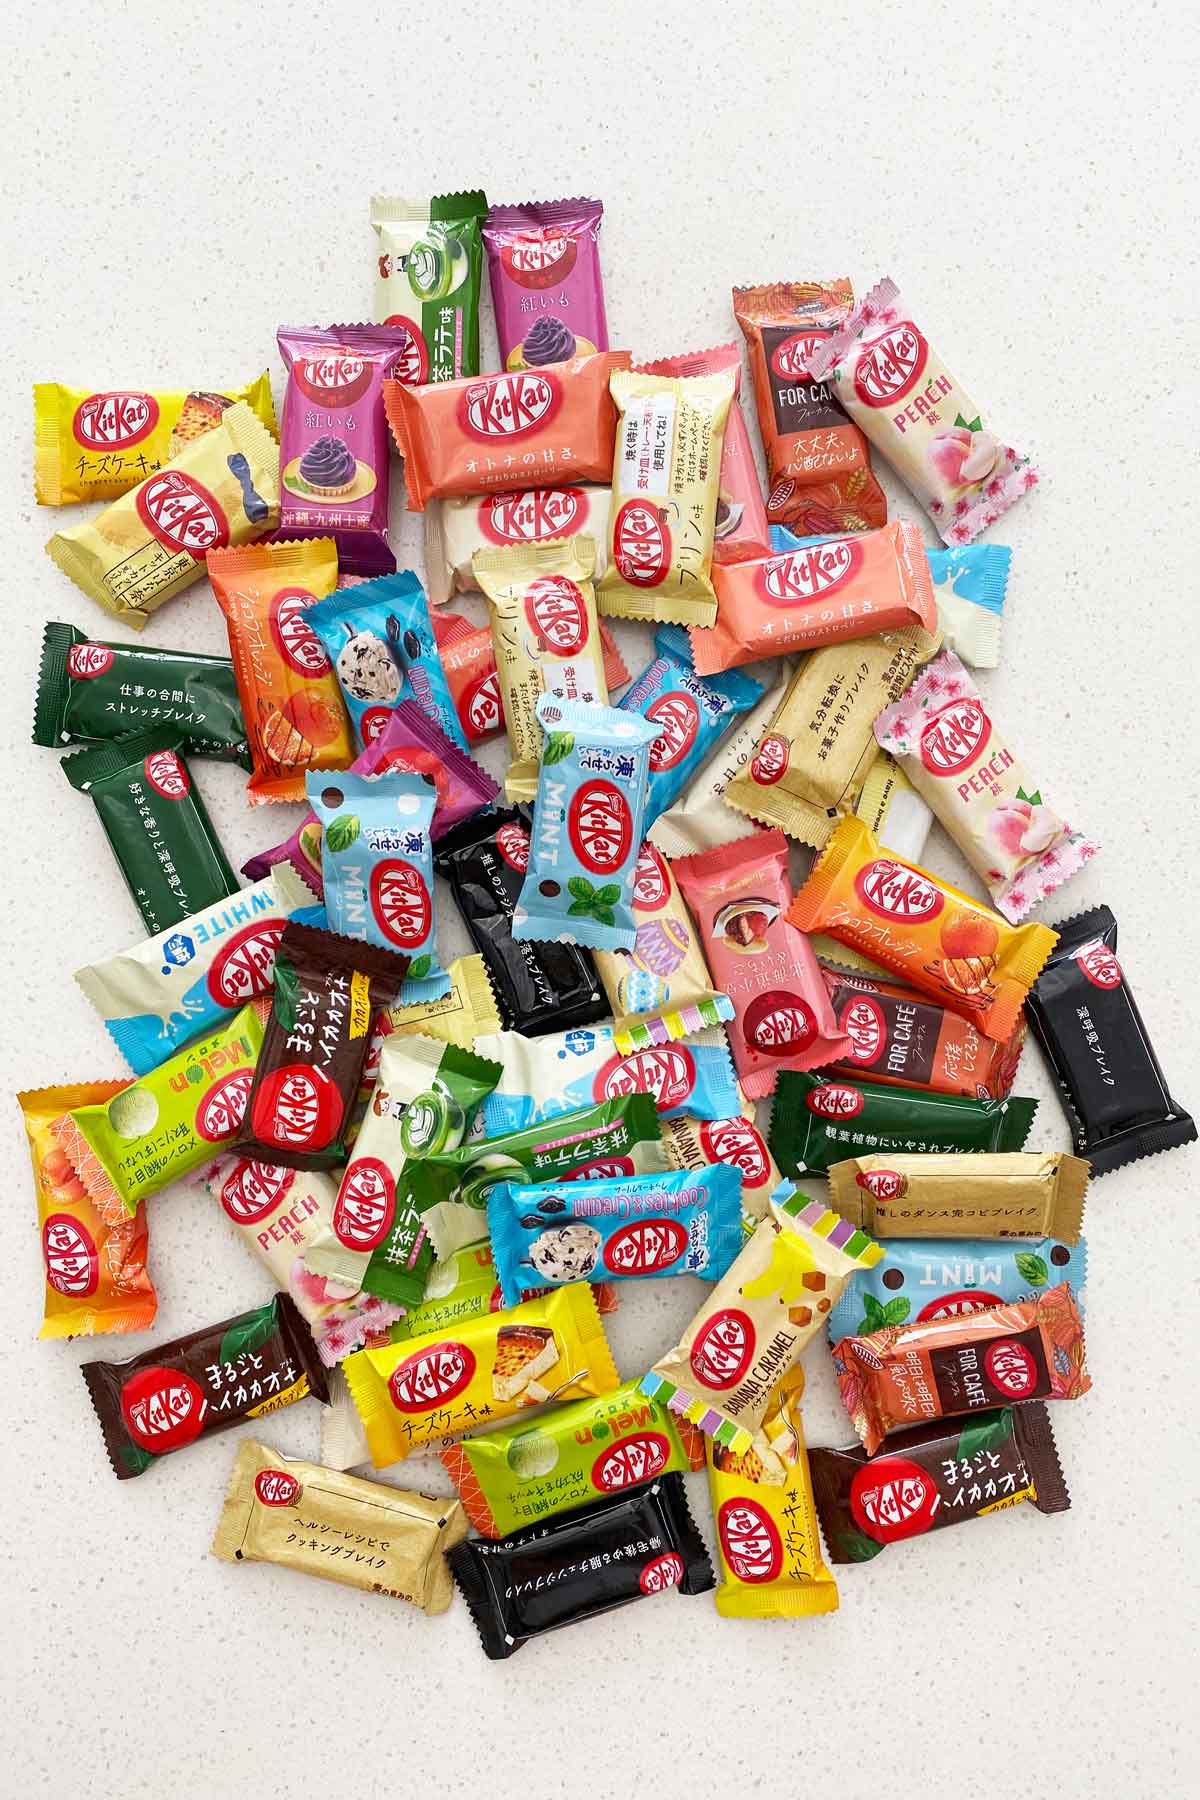 Popular flavours of KitKats in Japan and where to find them